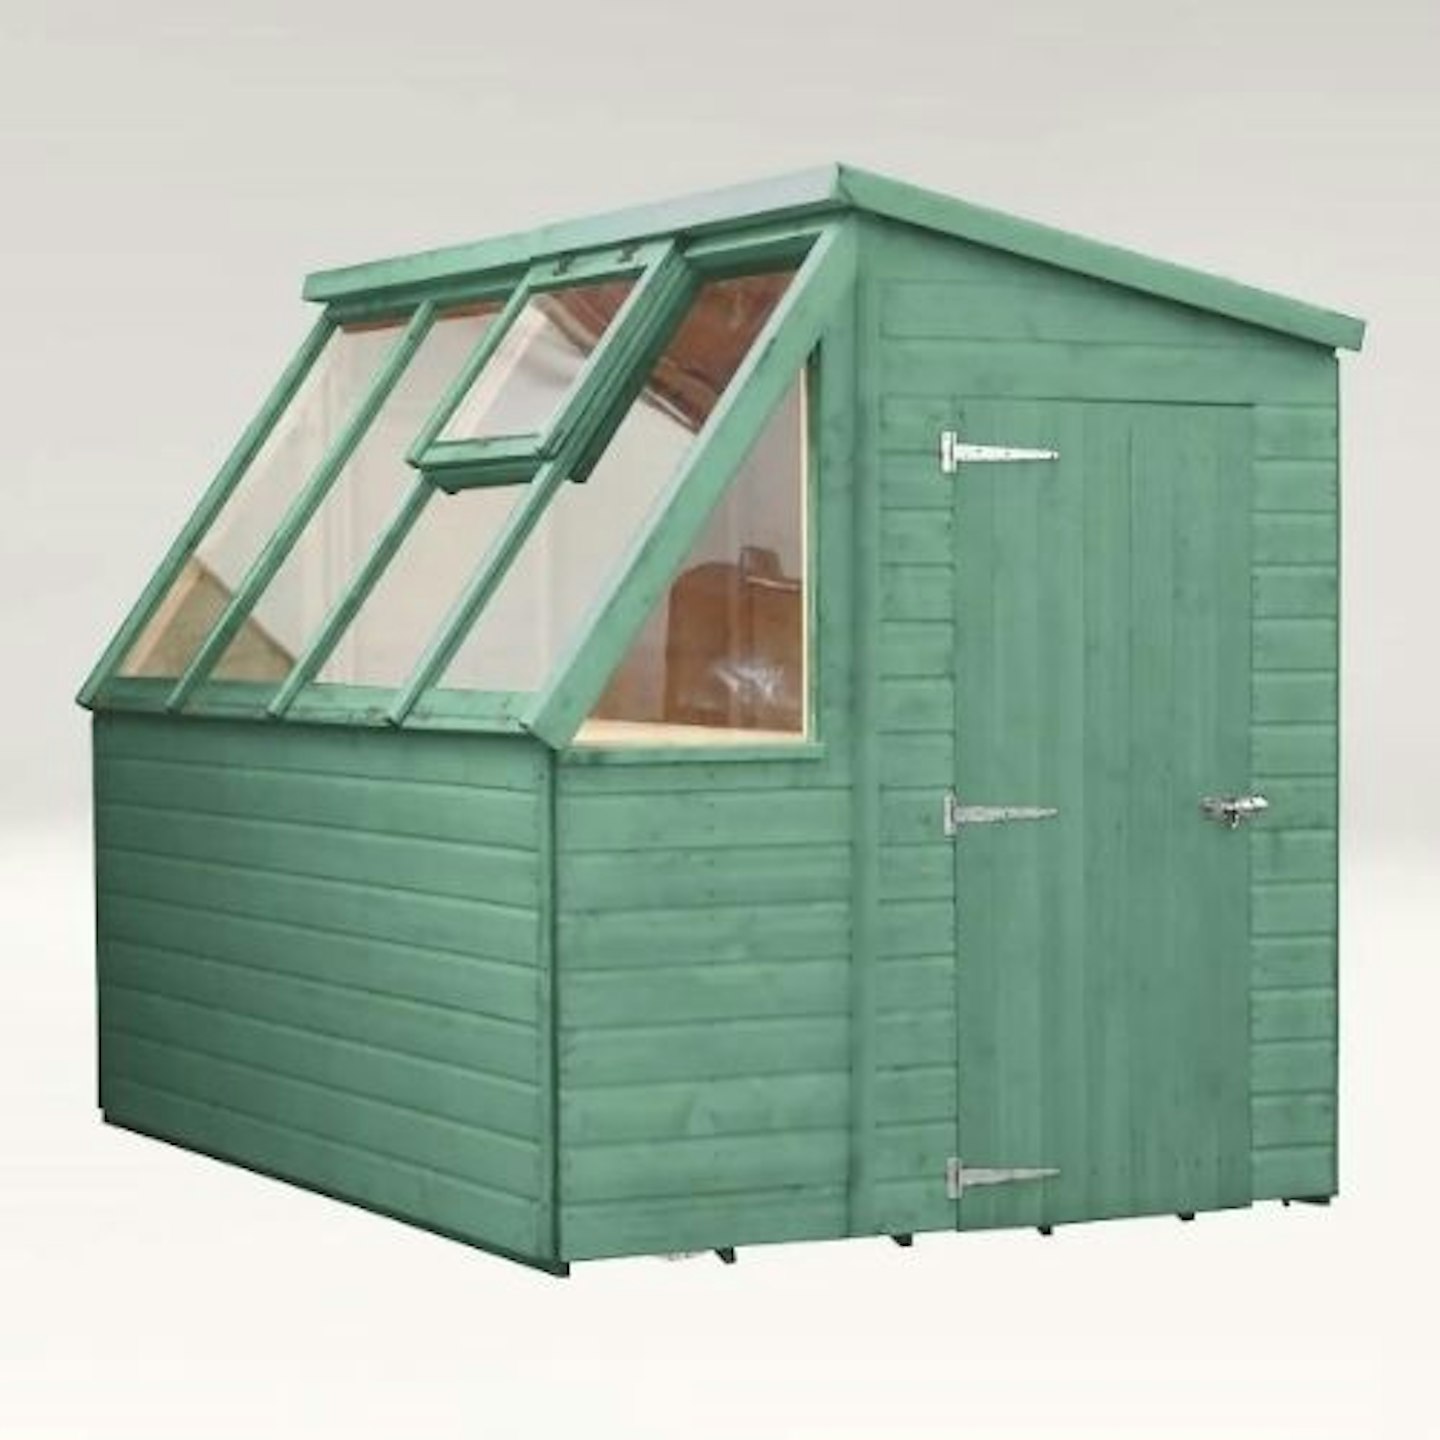 Country Living Caythorpe 8 x 6 Premium Potting Shed Painted